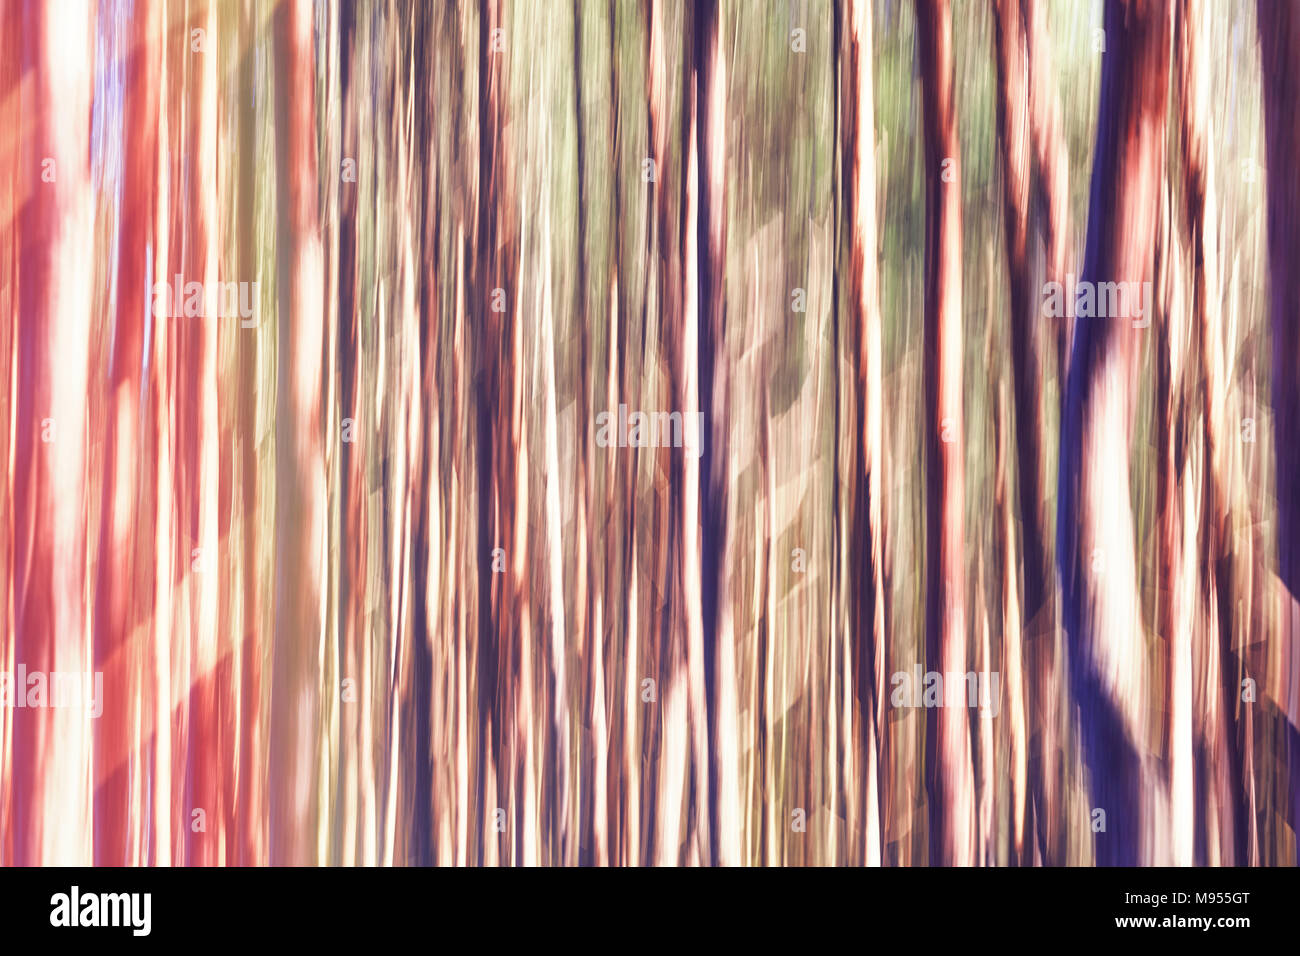 Motion blurred picture of trees, abstract background or wallpaper. Stock Photo